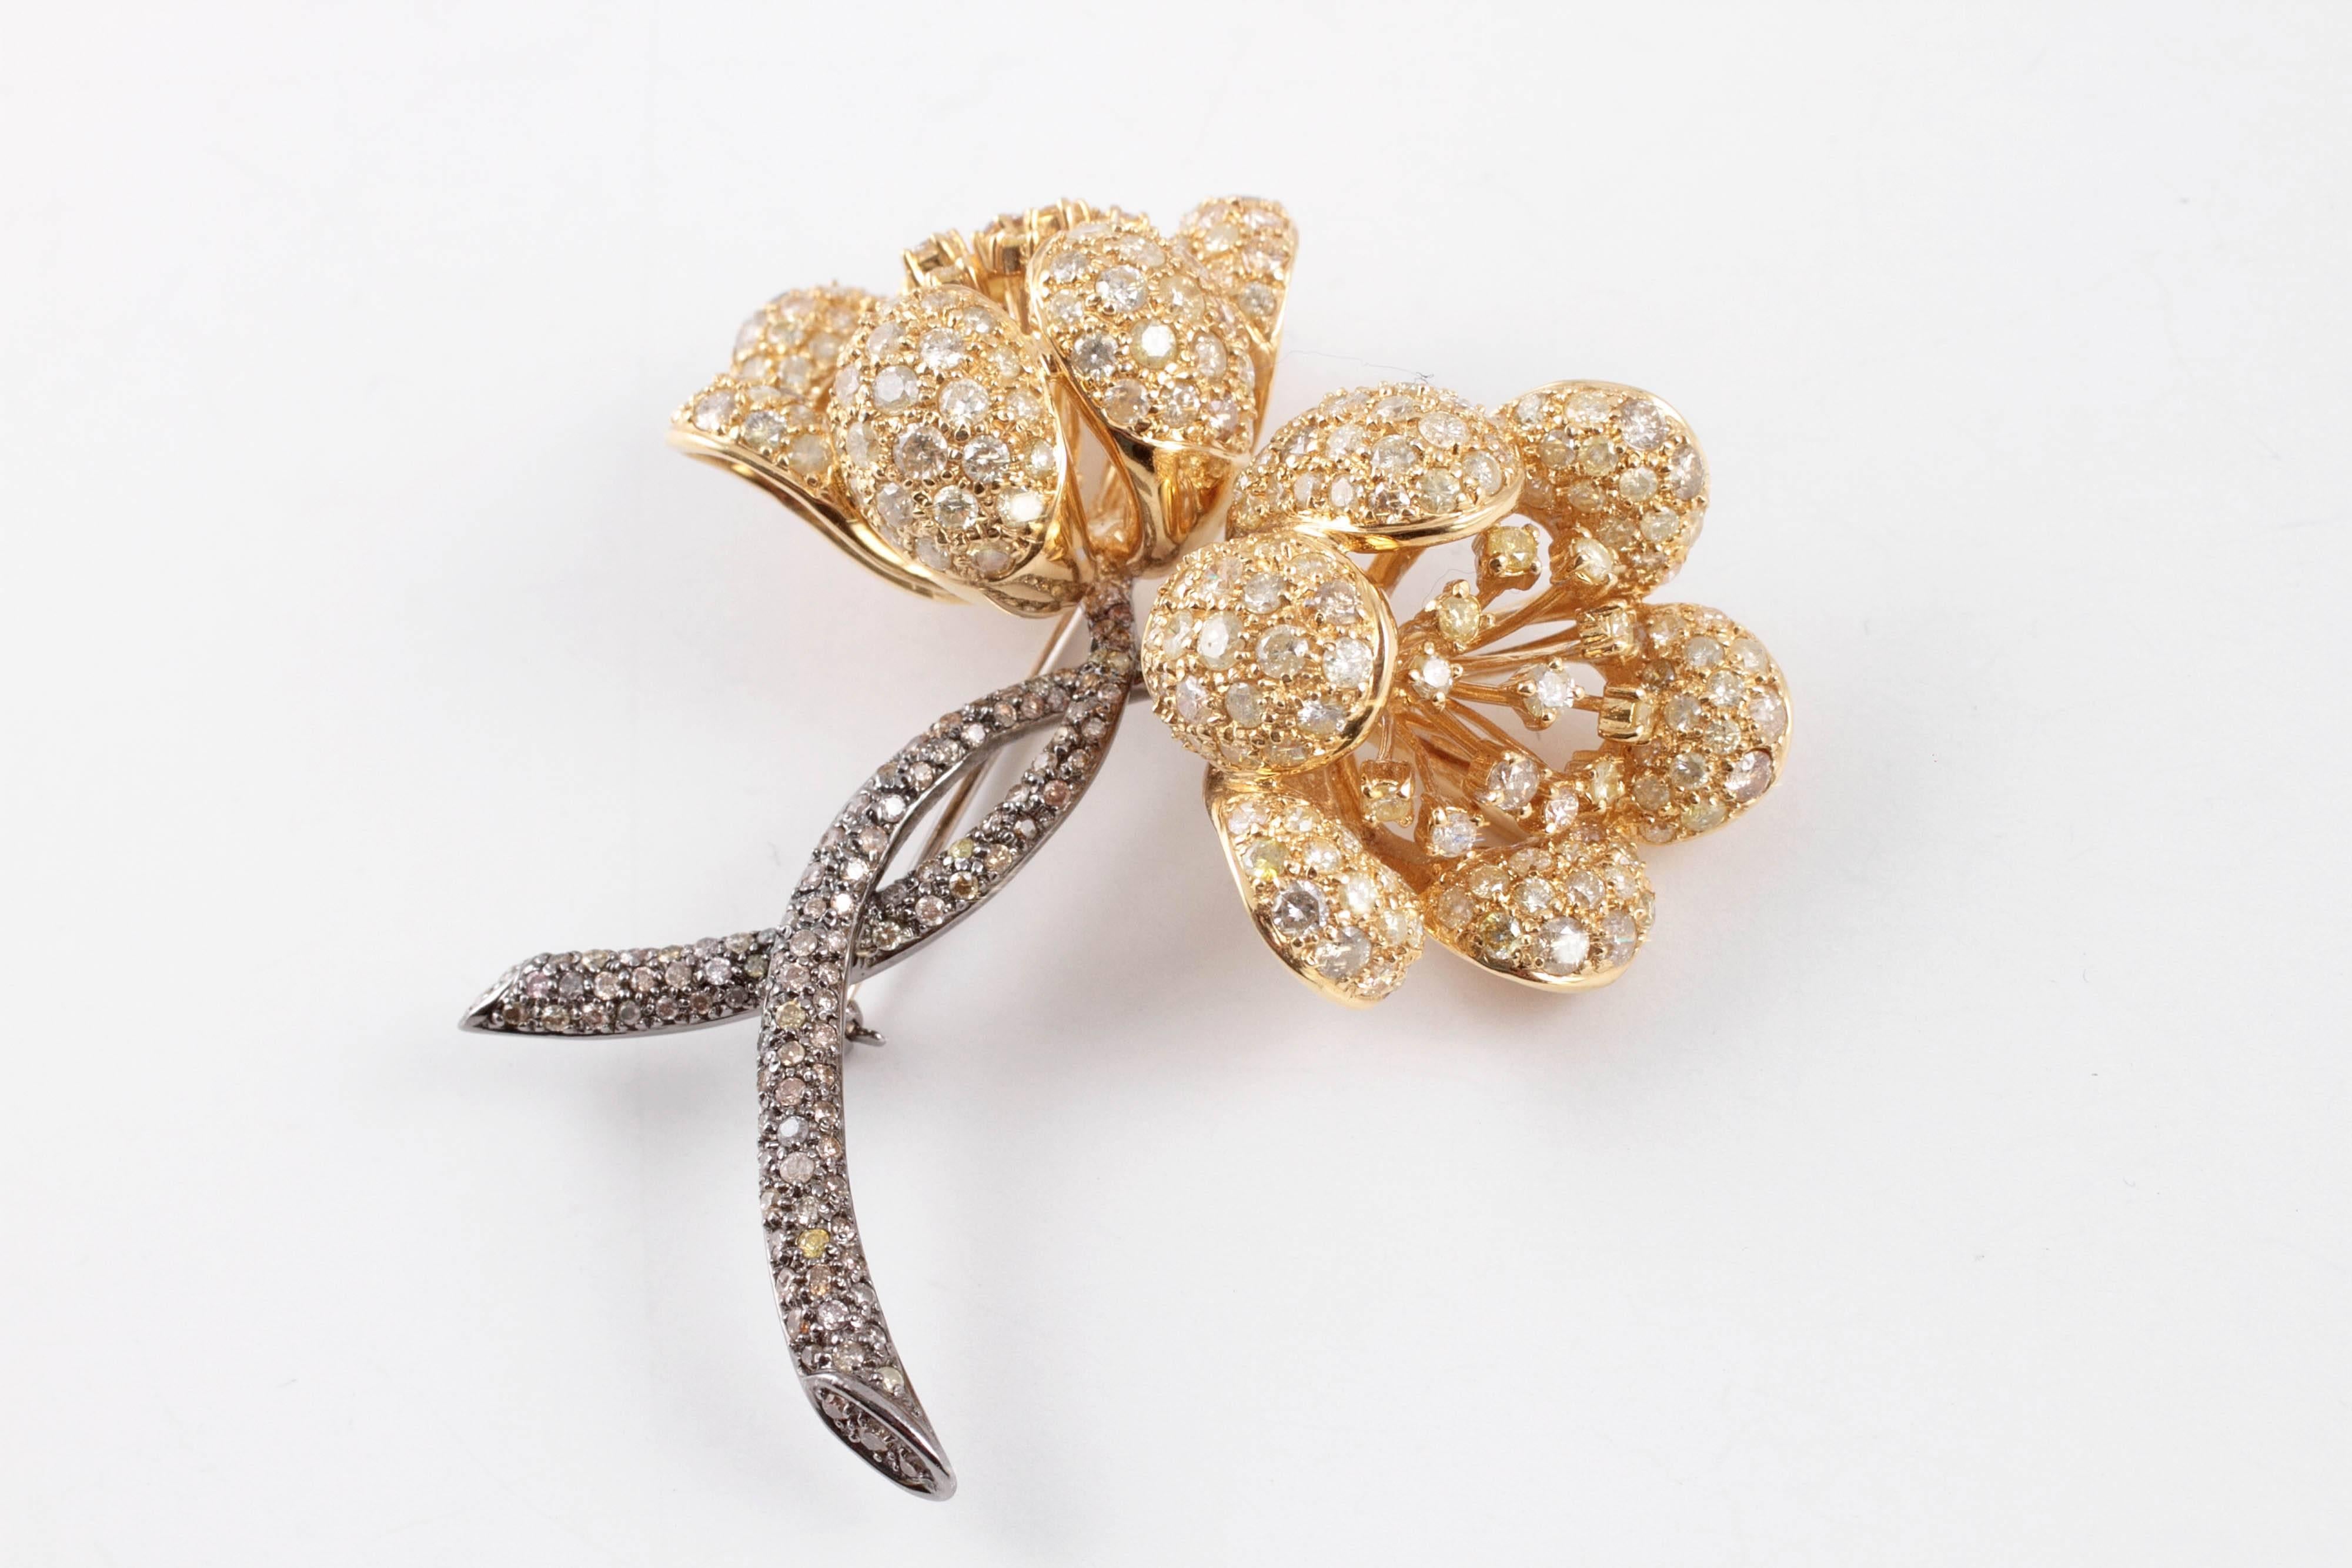 14.80 carats of white, yellow and brown diamonds adorn this lovely flower brooch!  It is composed of 18 karat yellow and white gold and is secured with a straight-pin clasp.